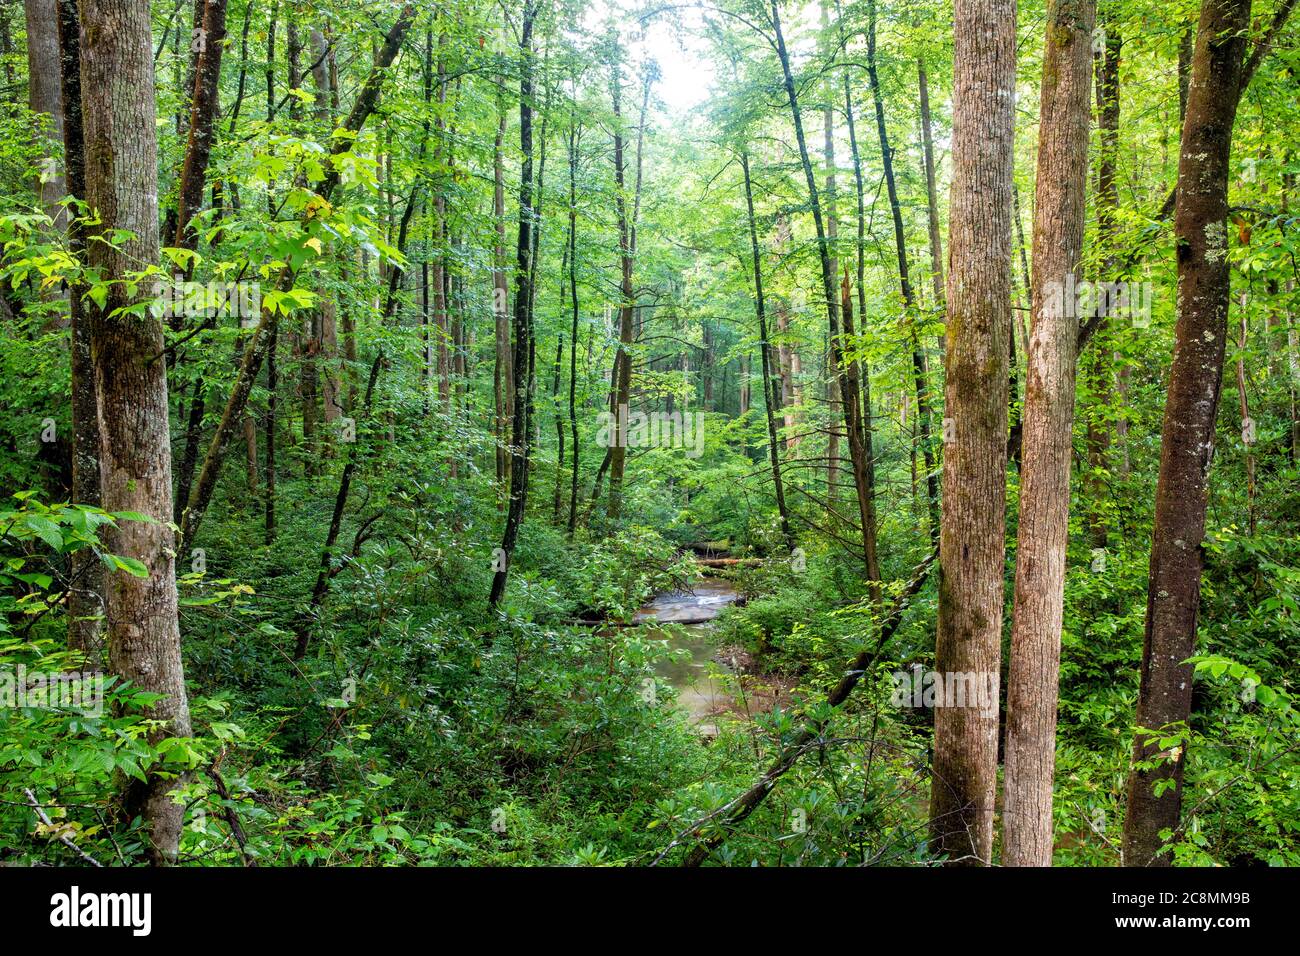 View of Avery Creek running through Pisgah Forest in summer- Pisgah National Forest, Brevard, North Carolina, USA Stock Photo